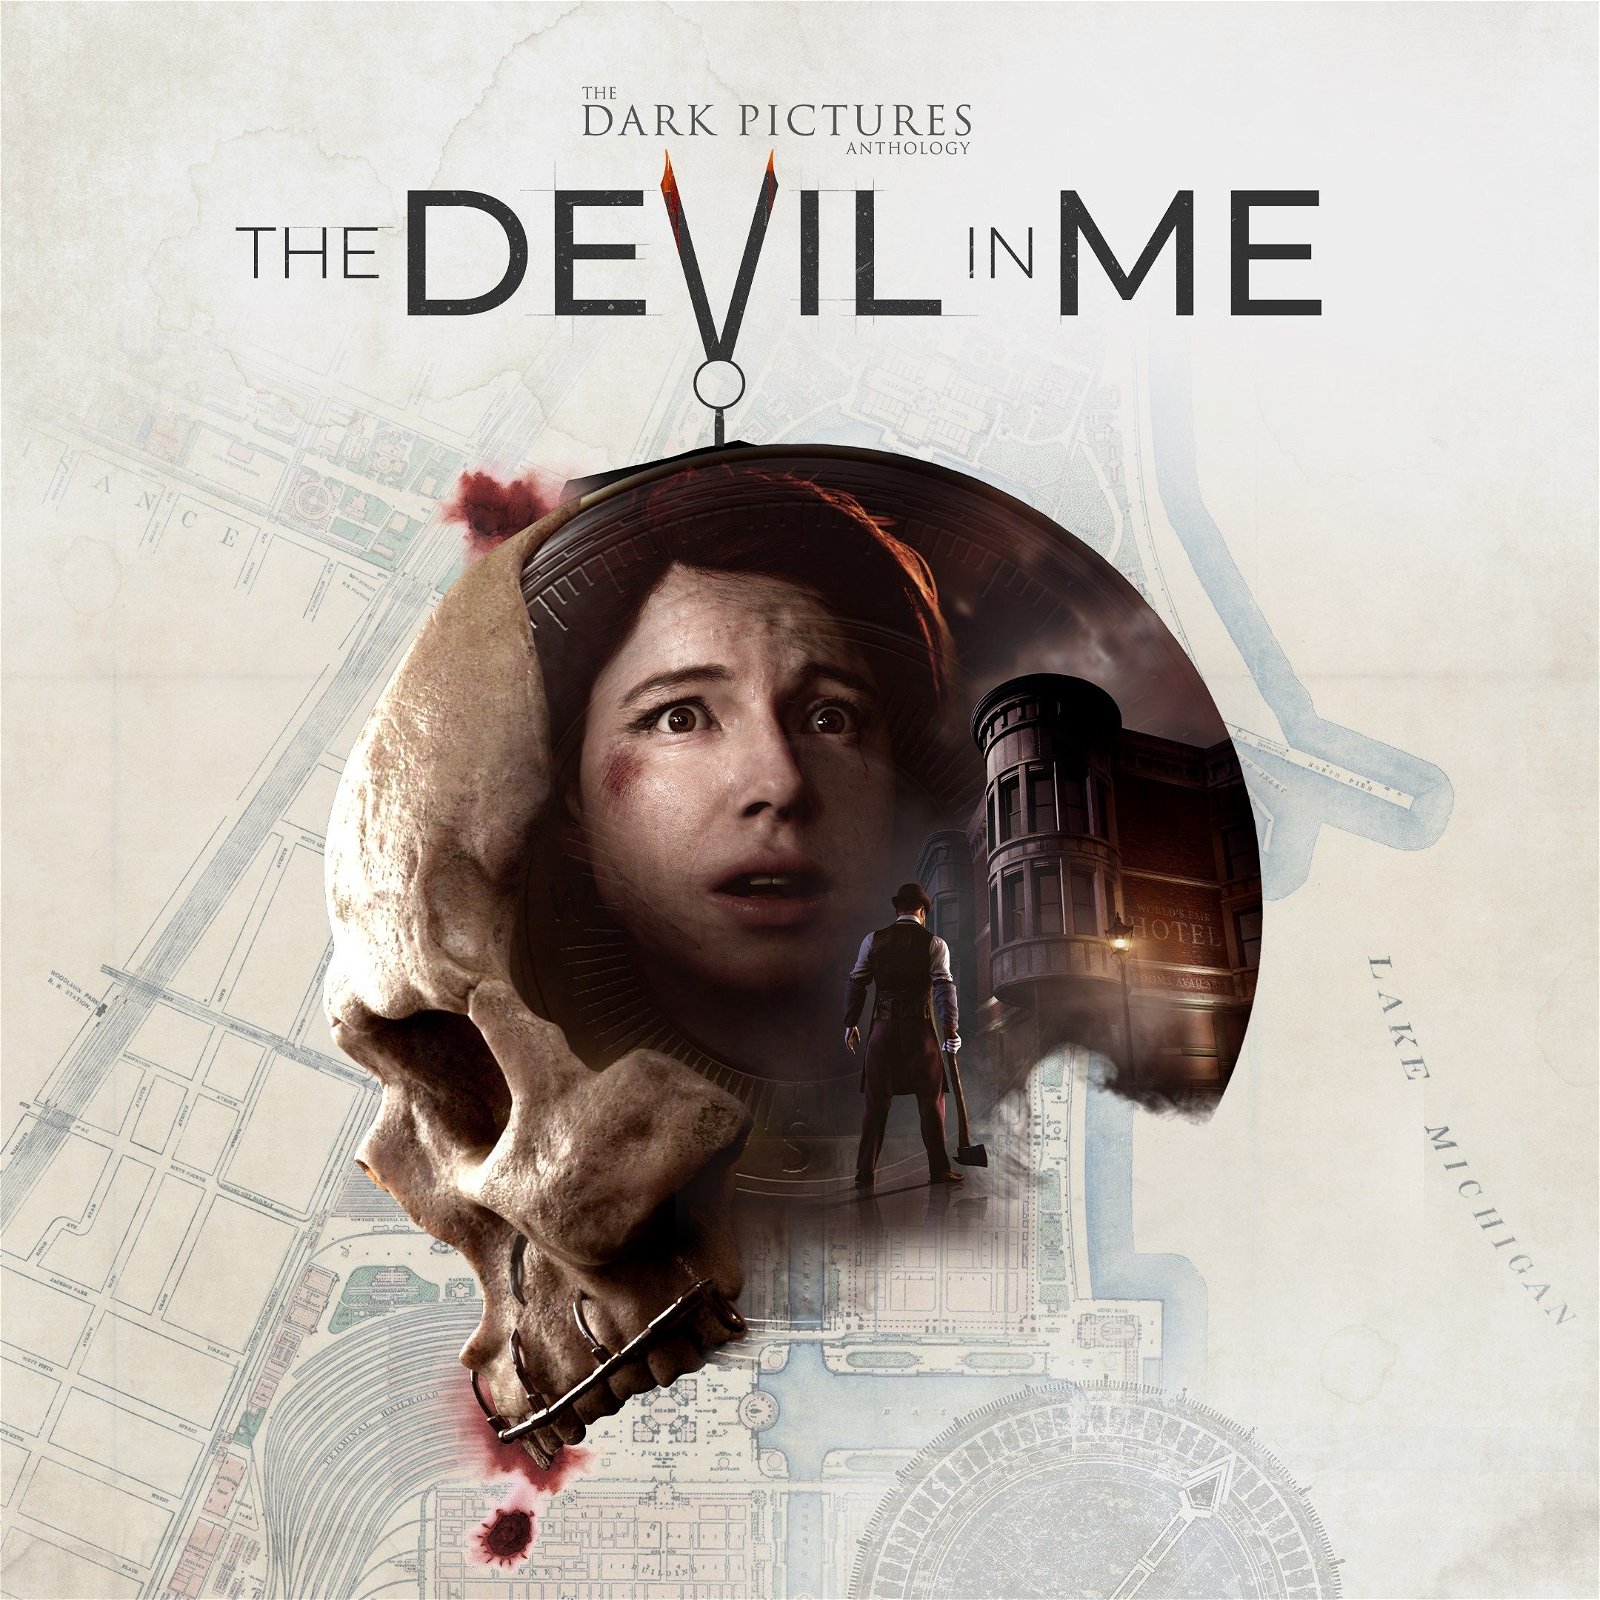 Image of The Dark Pictures Anthology: The Devil in Me